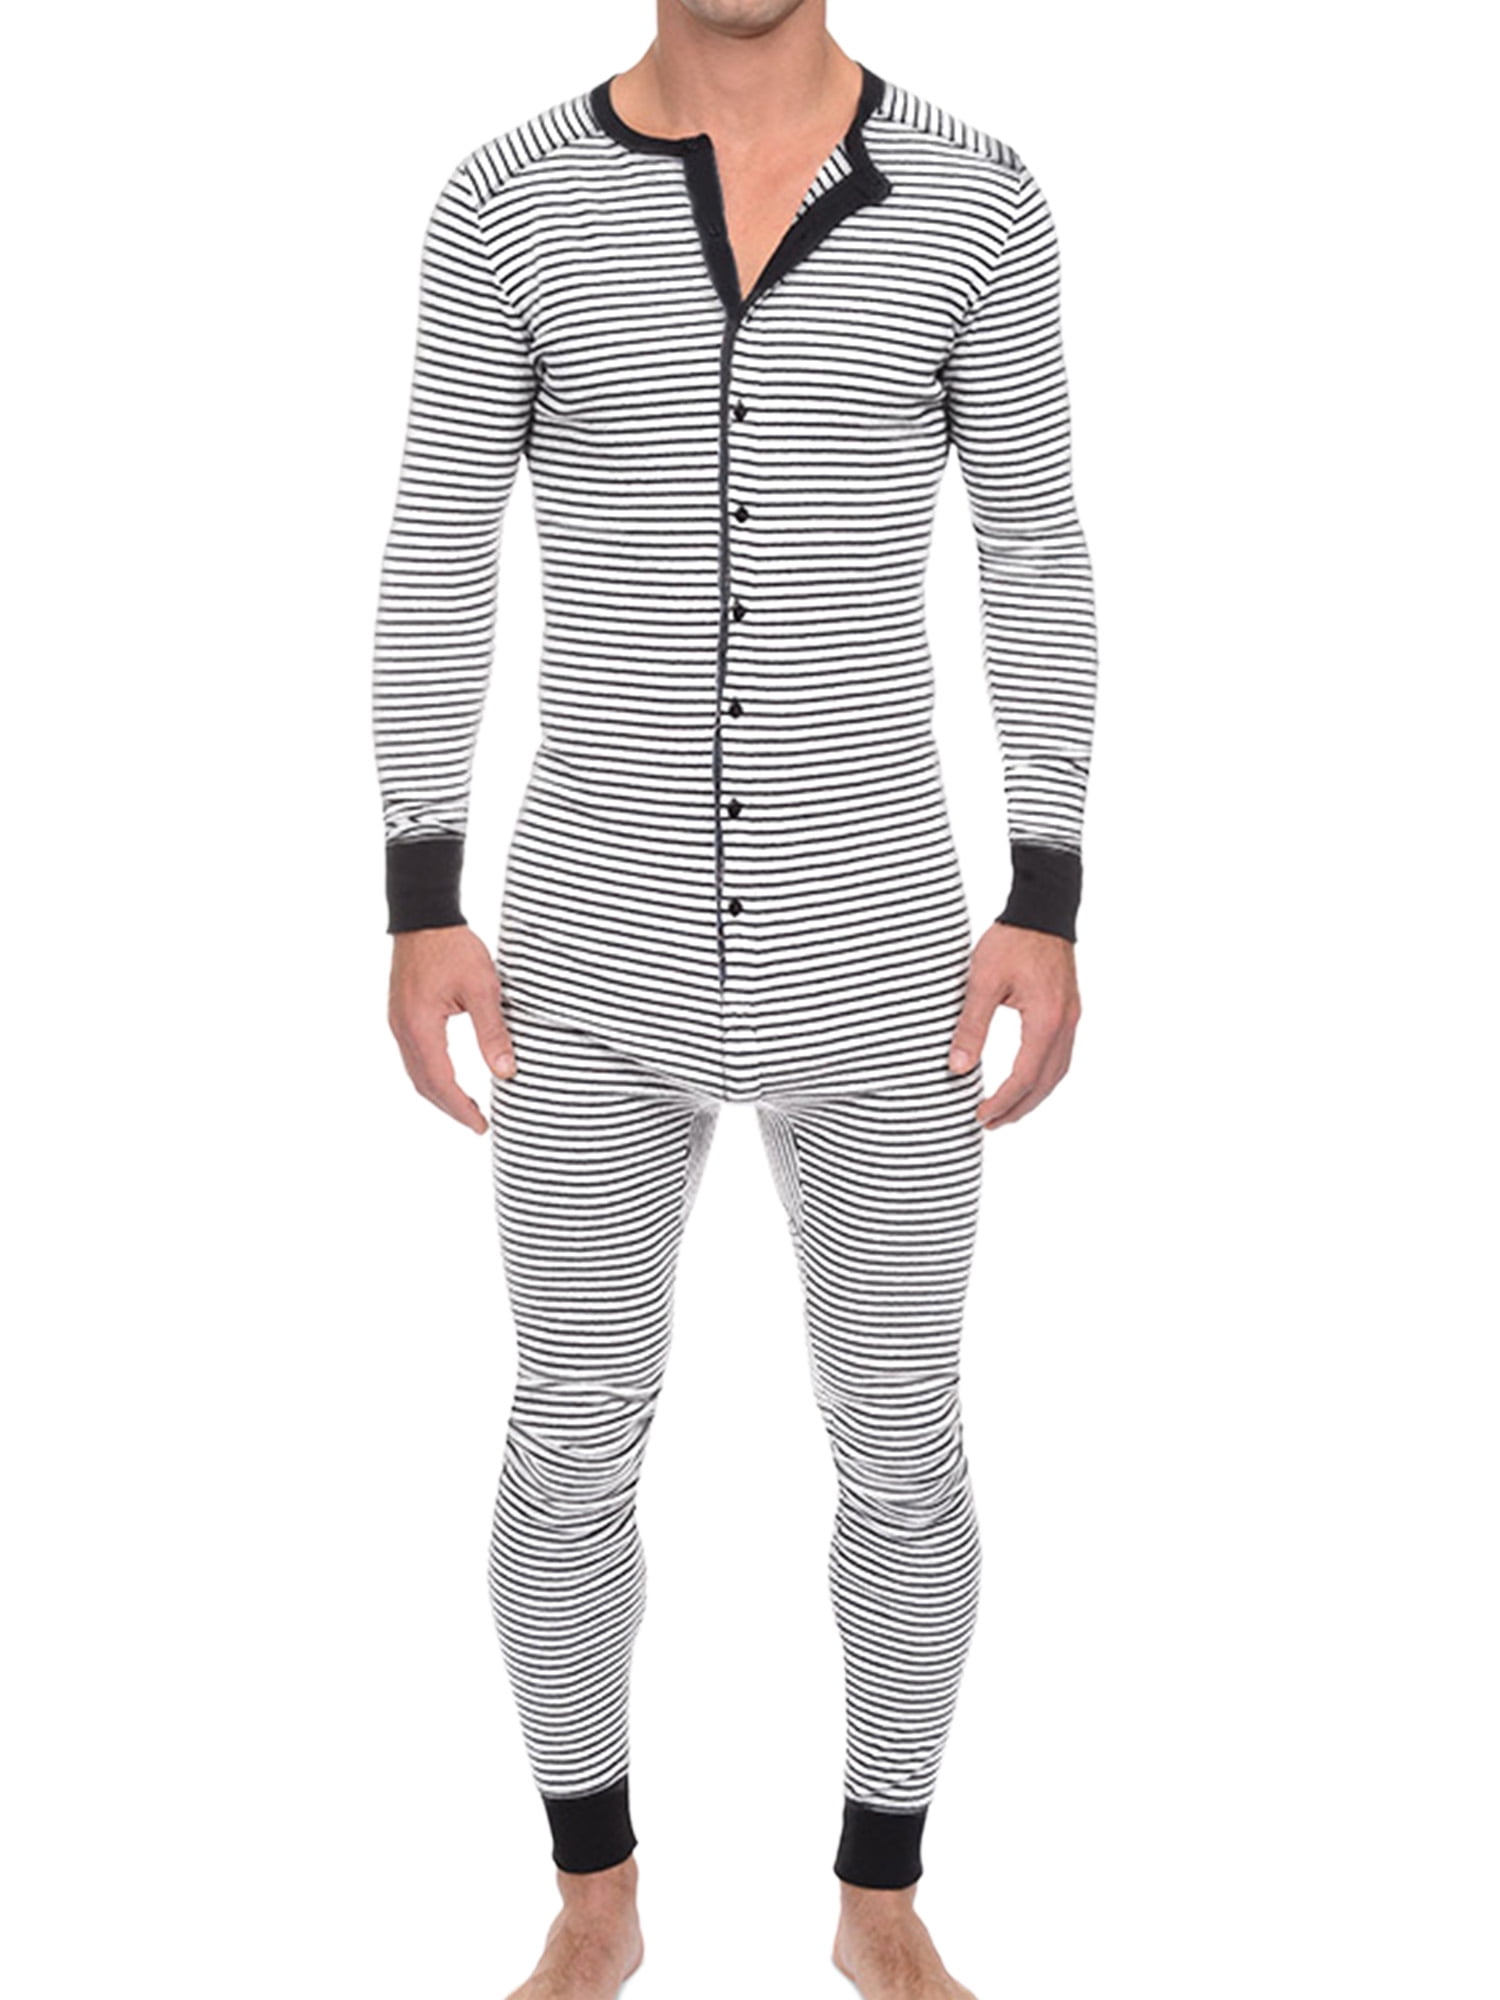 Thermal one piece base layer under suit body suit 